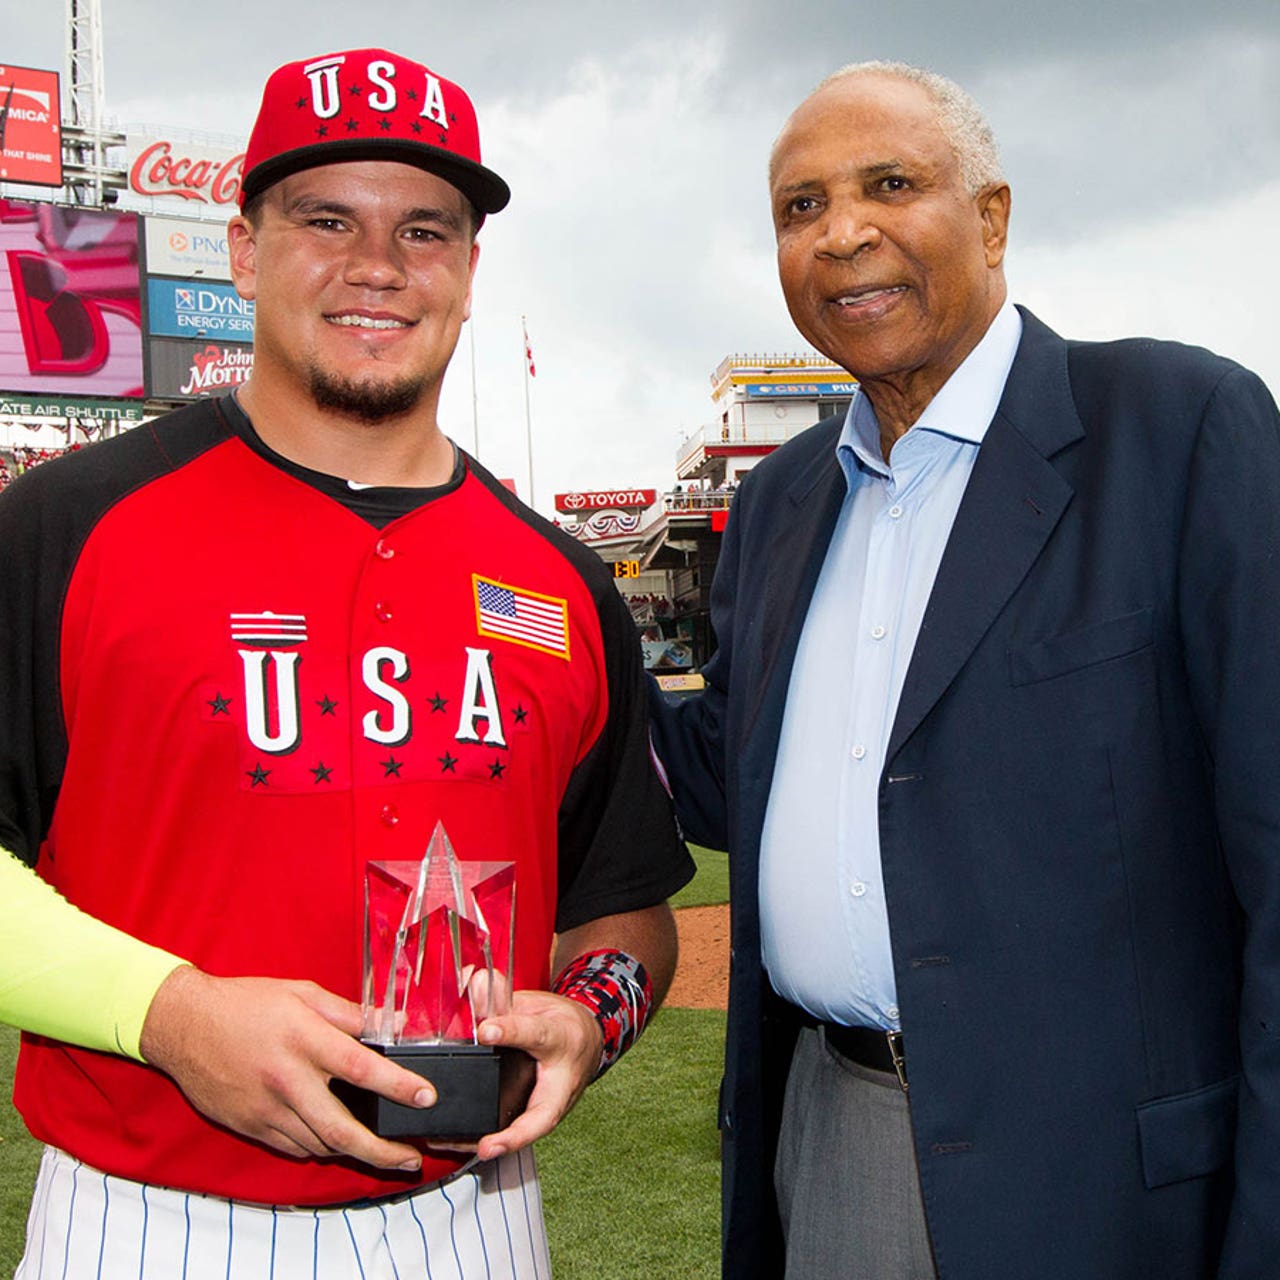 Cubs' Schwarber leads U.S. in rout over World at Futures Game